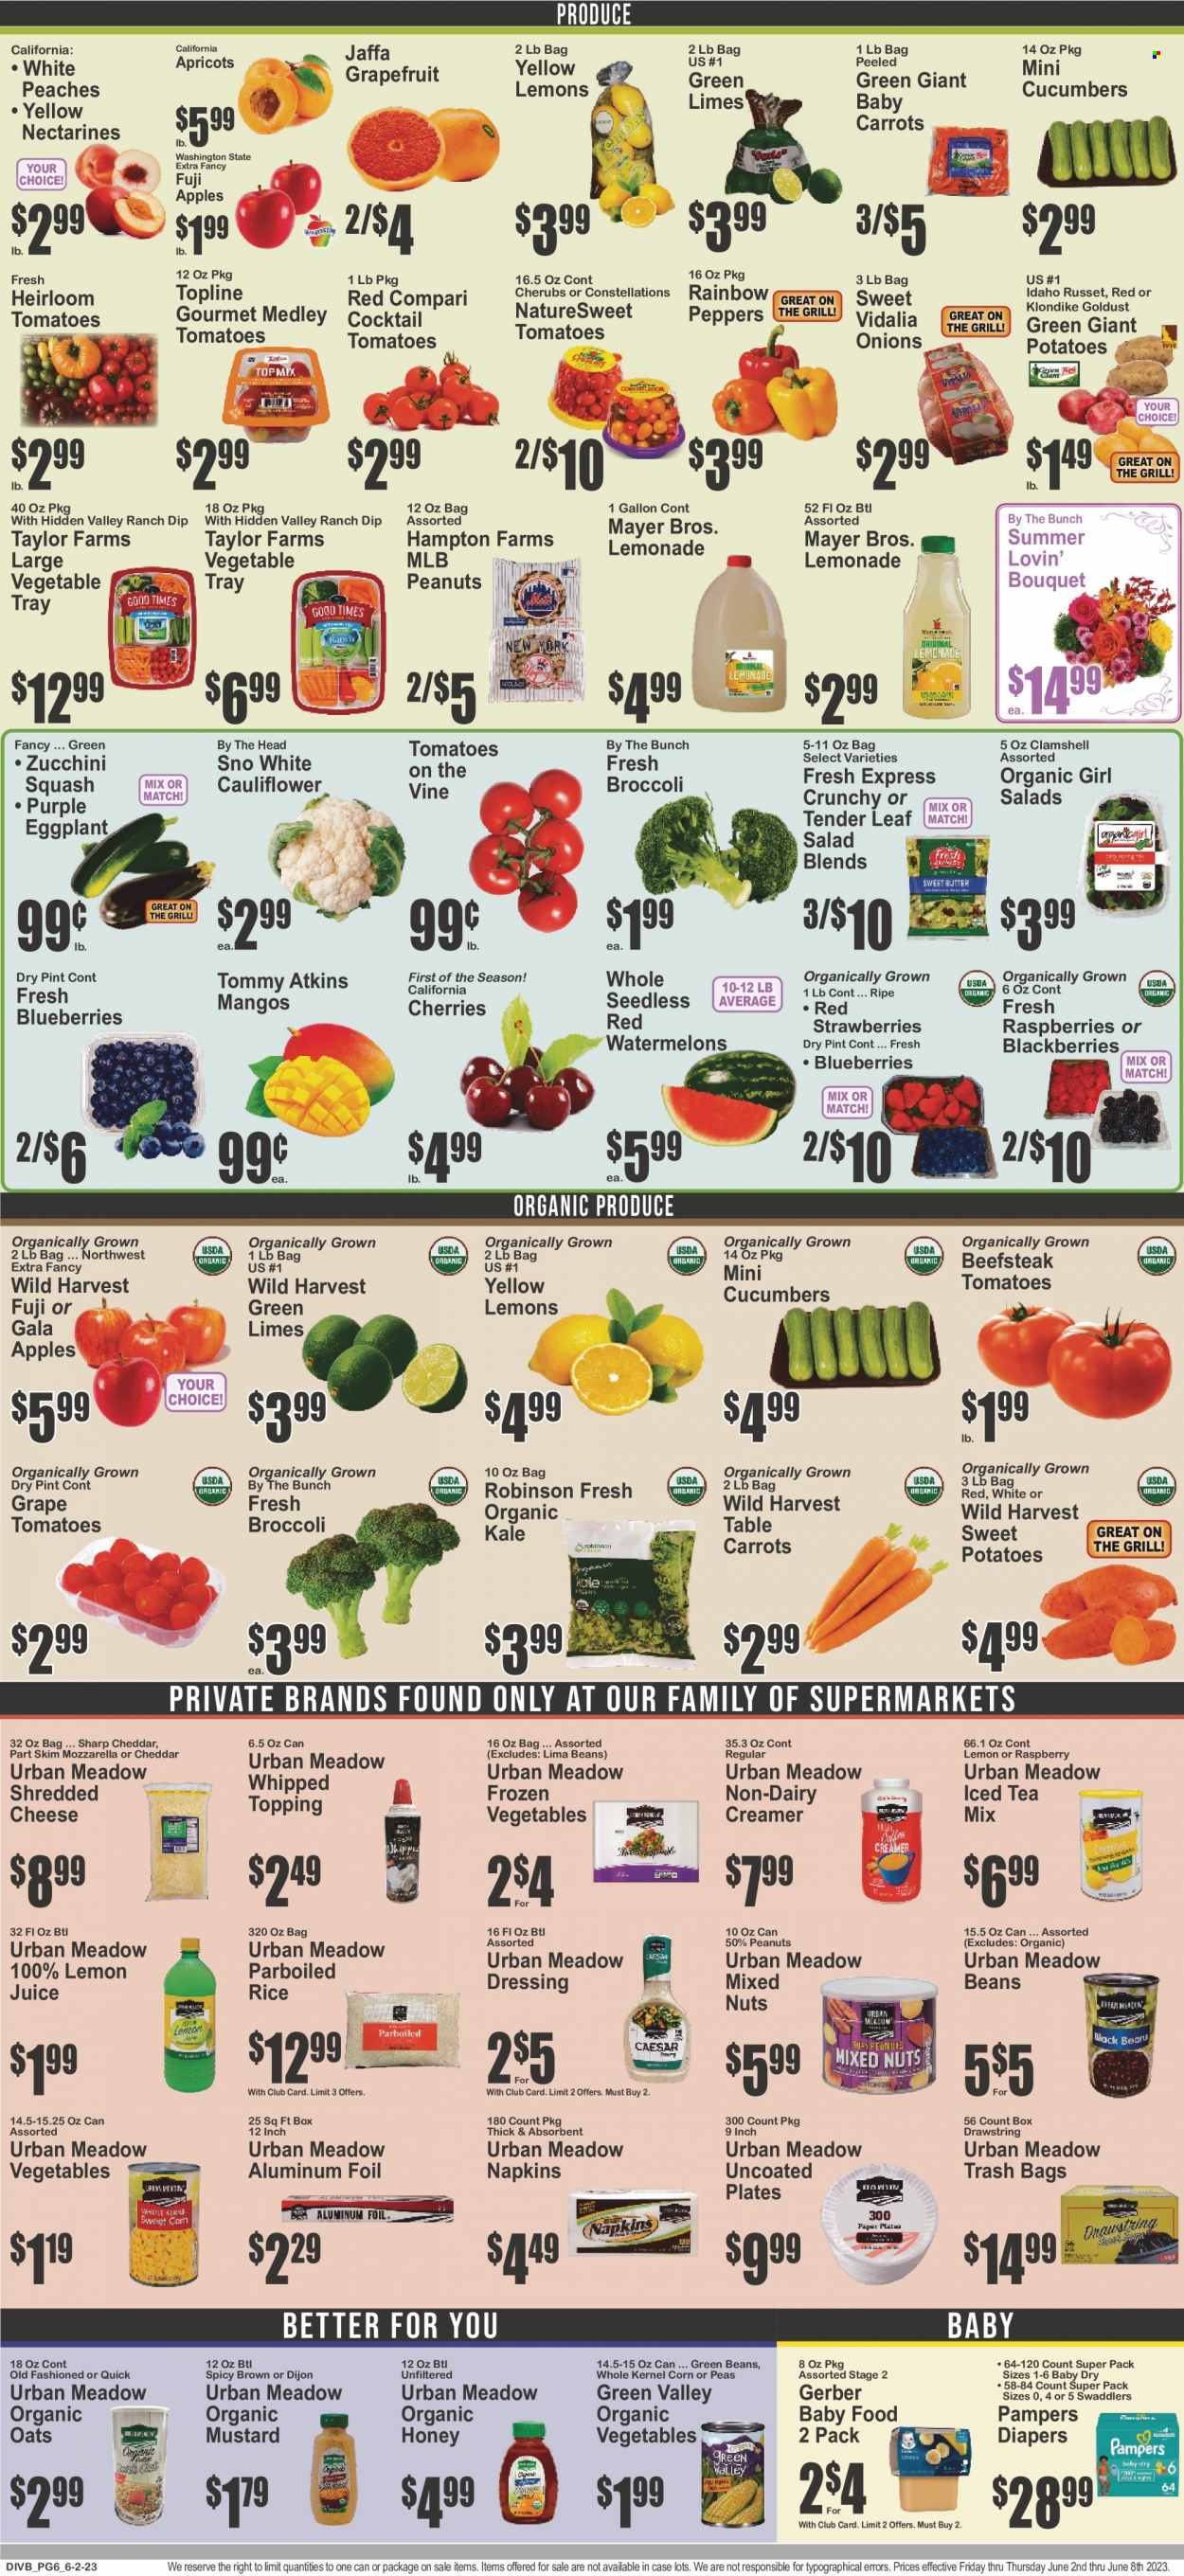 thumbnail - Super Fresh Flyer - 06/02/2023 - 06/08/2023 - Sales products - beans, broccoli, carrots, corn, cucumber, green beans, russet potatoes, sweet potato, tomatoes, zucchini, kale, potatoes, peas, onion, salad, peppers, eggplant, Wild Harvest, blackberries, Gala, grapefruits, limes, raspberries, strawberries, watermelon, cherries, Fuji apple, apricots, peaches, mozzarella, shredded cheese, non dairy creamer, creamer, dip, frozen vegetables, lima beans, Gerber, oats, topping, rice, parboiled rice, mustard, honey, peanuts, mixed nuts, lemonade, ice tea, lemon juice, cocktail, Pampers, napkins, nappies, nectarines. Page 6.